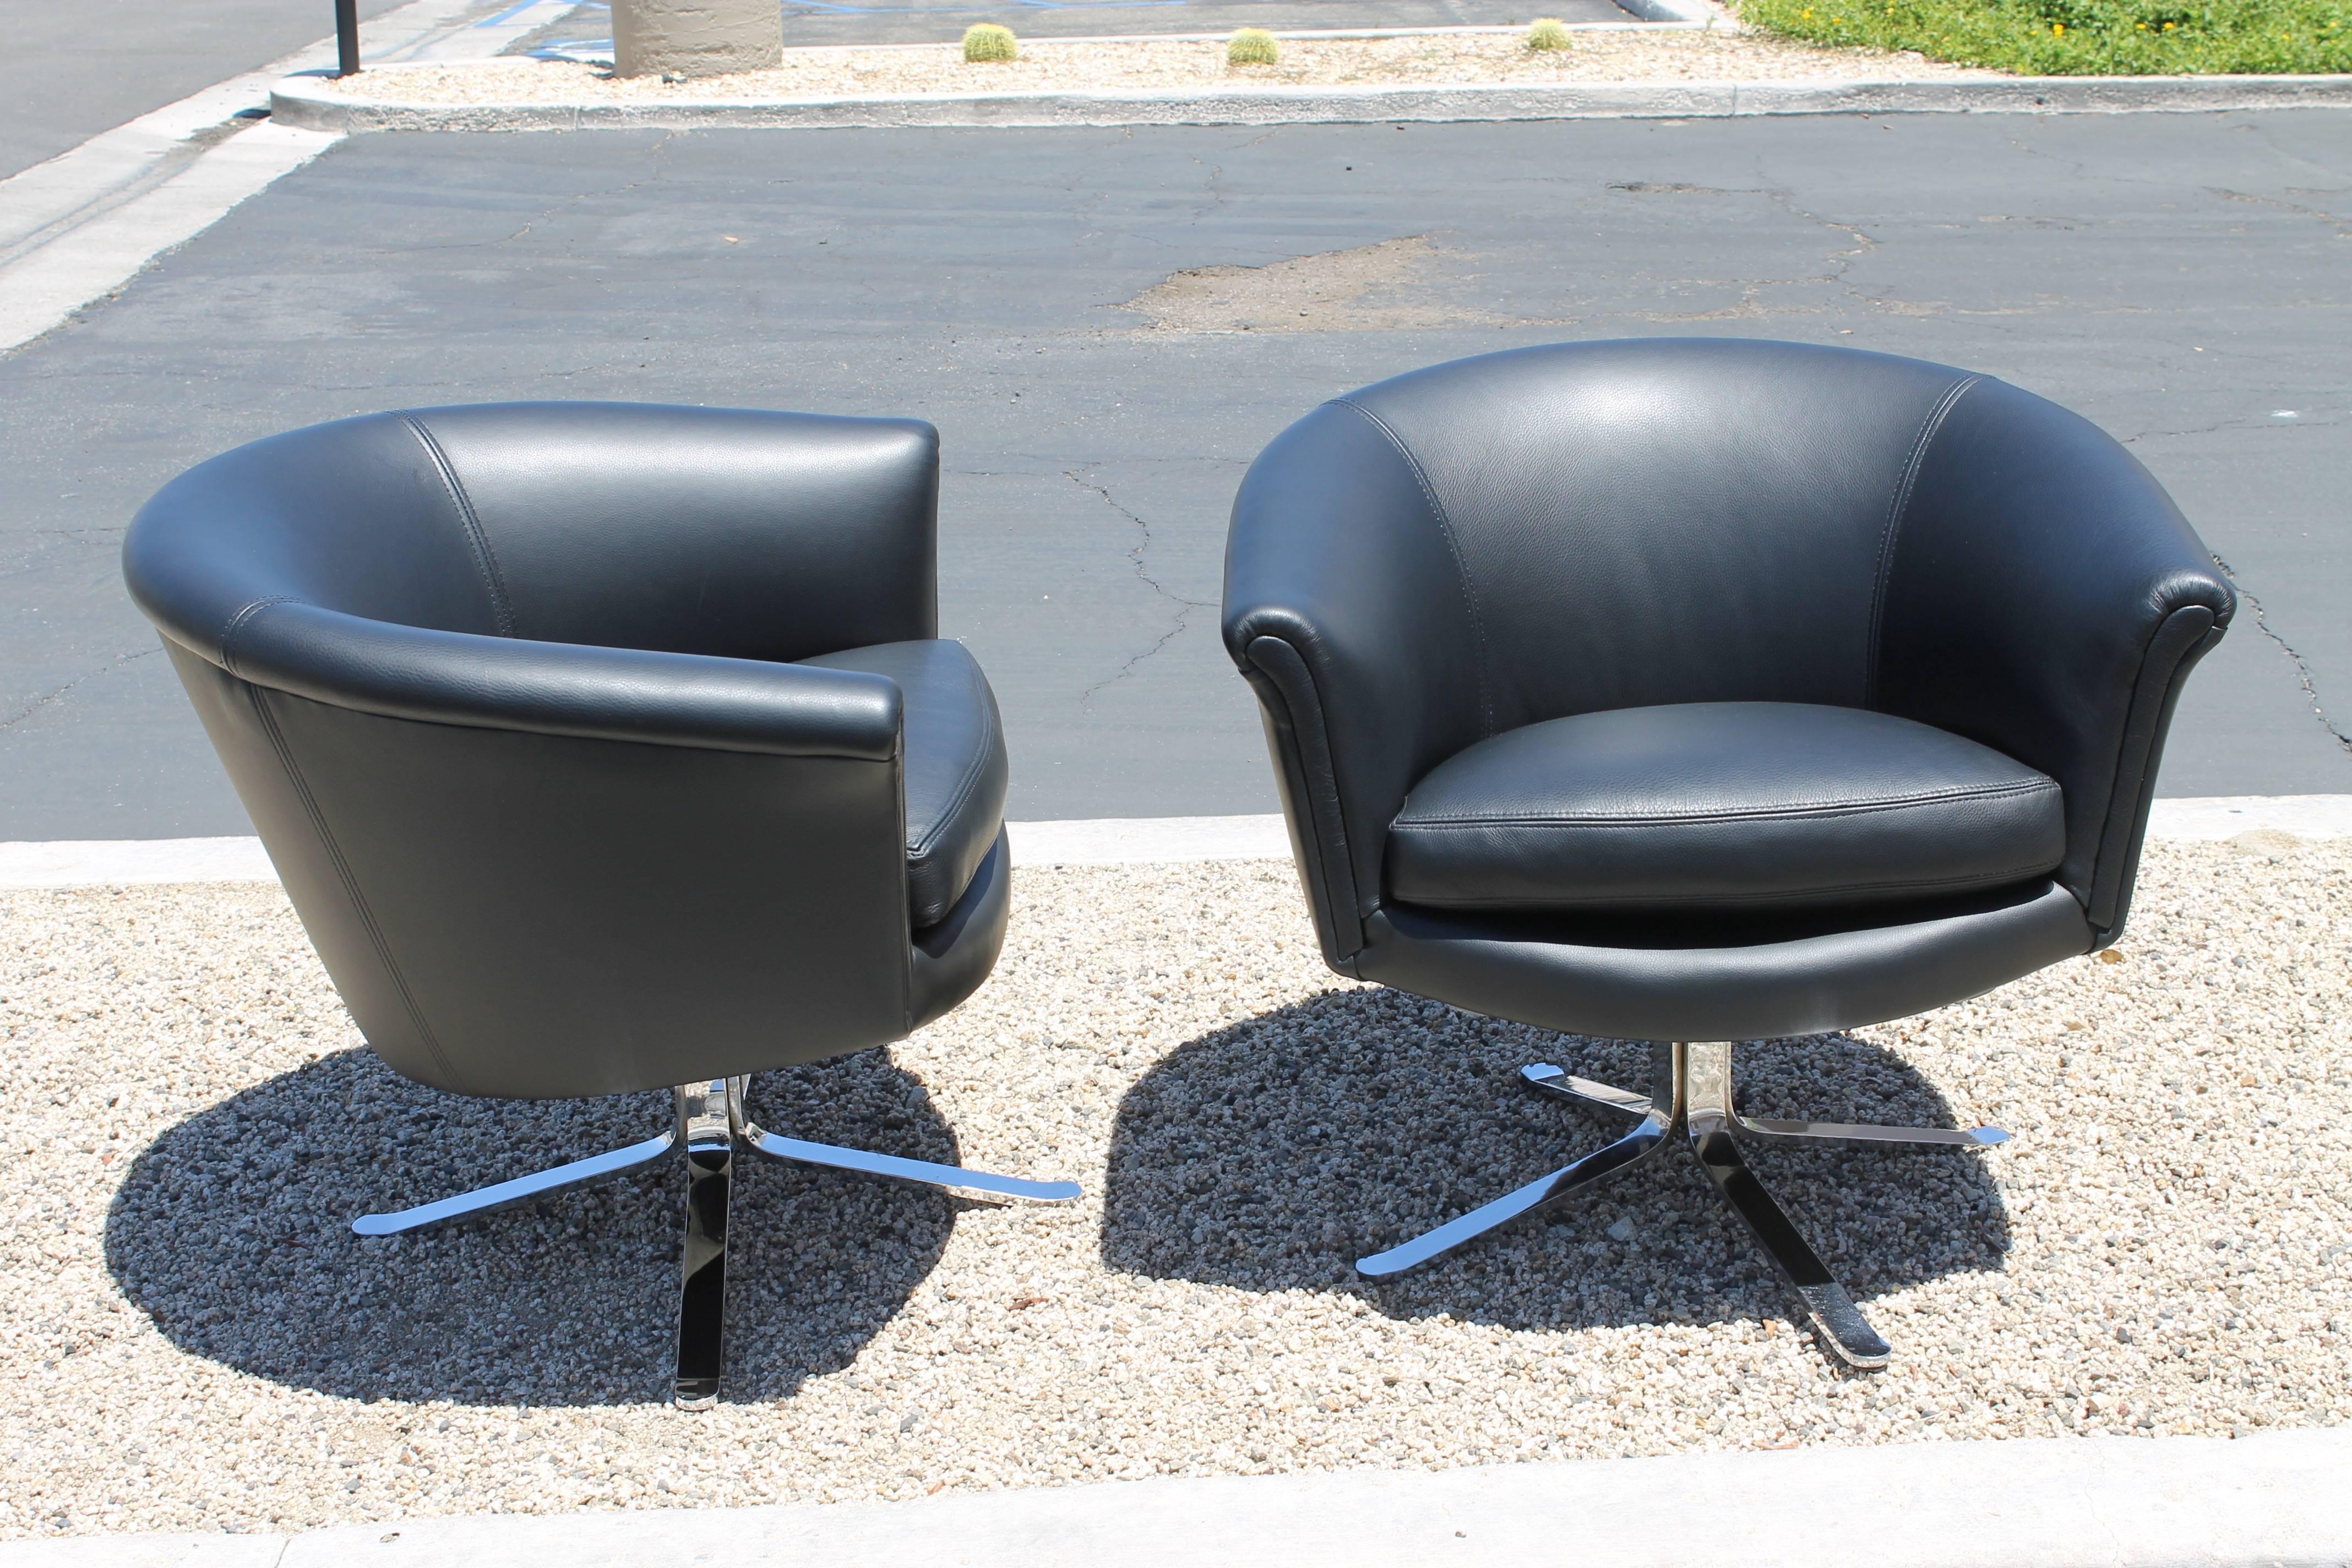 Pair of swivel or barrel lounge chairs by Nicos Zographos. Each chair measures 30